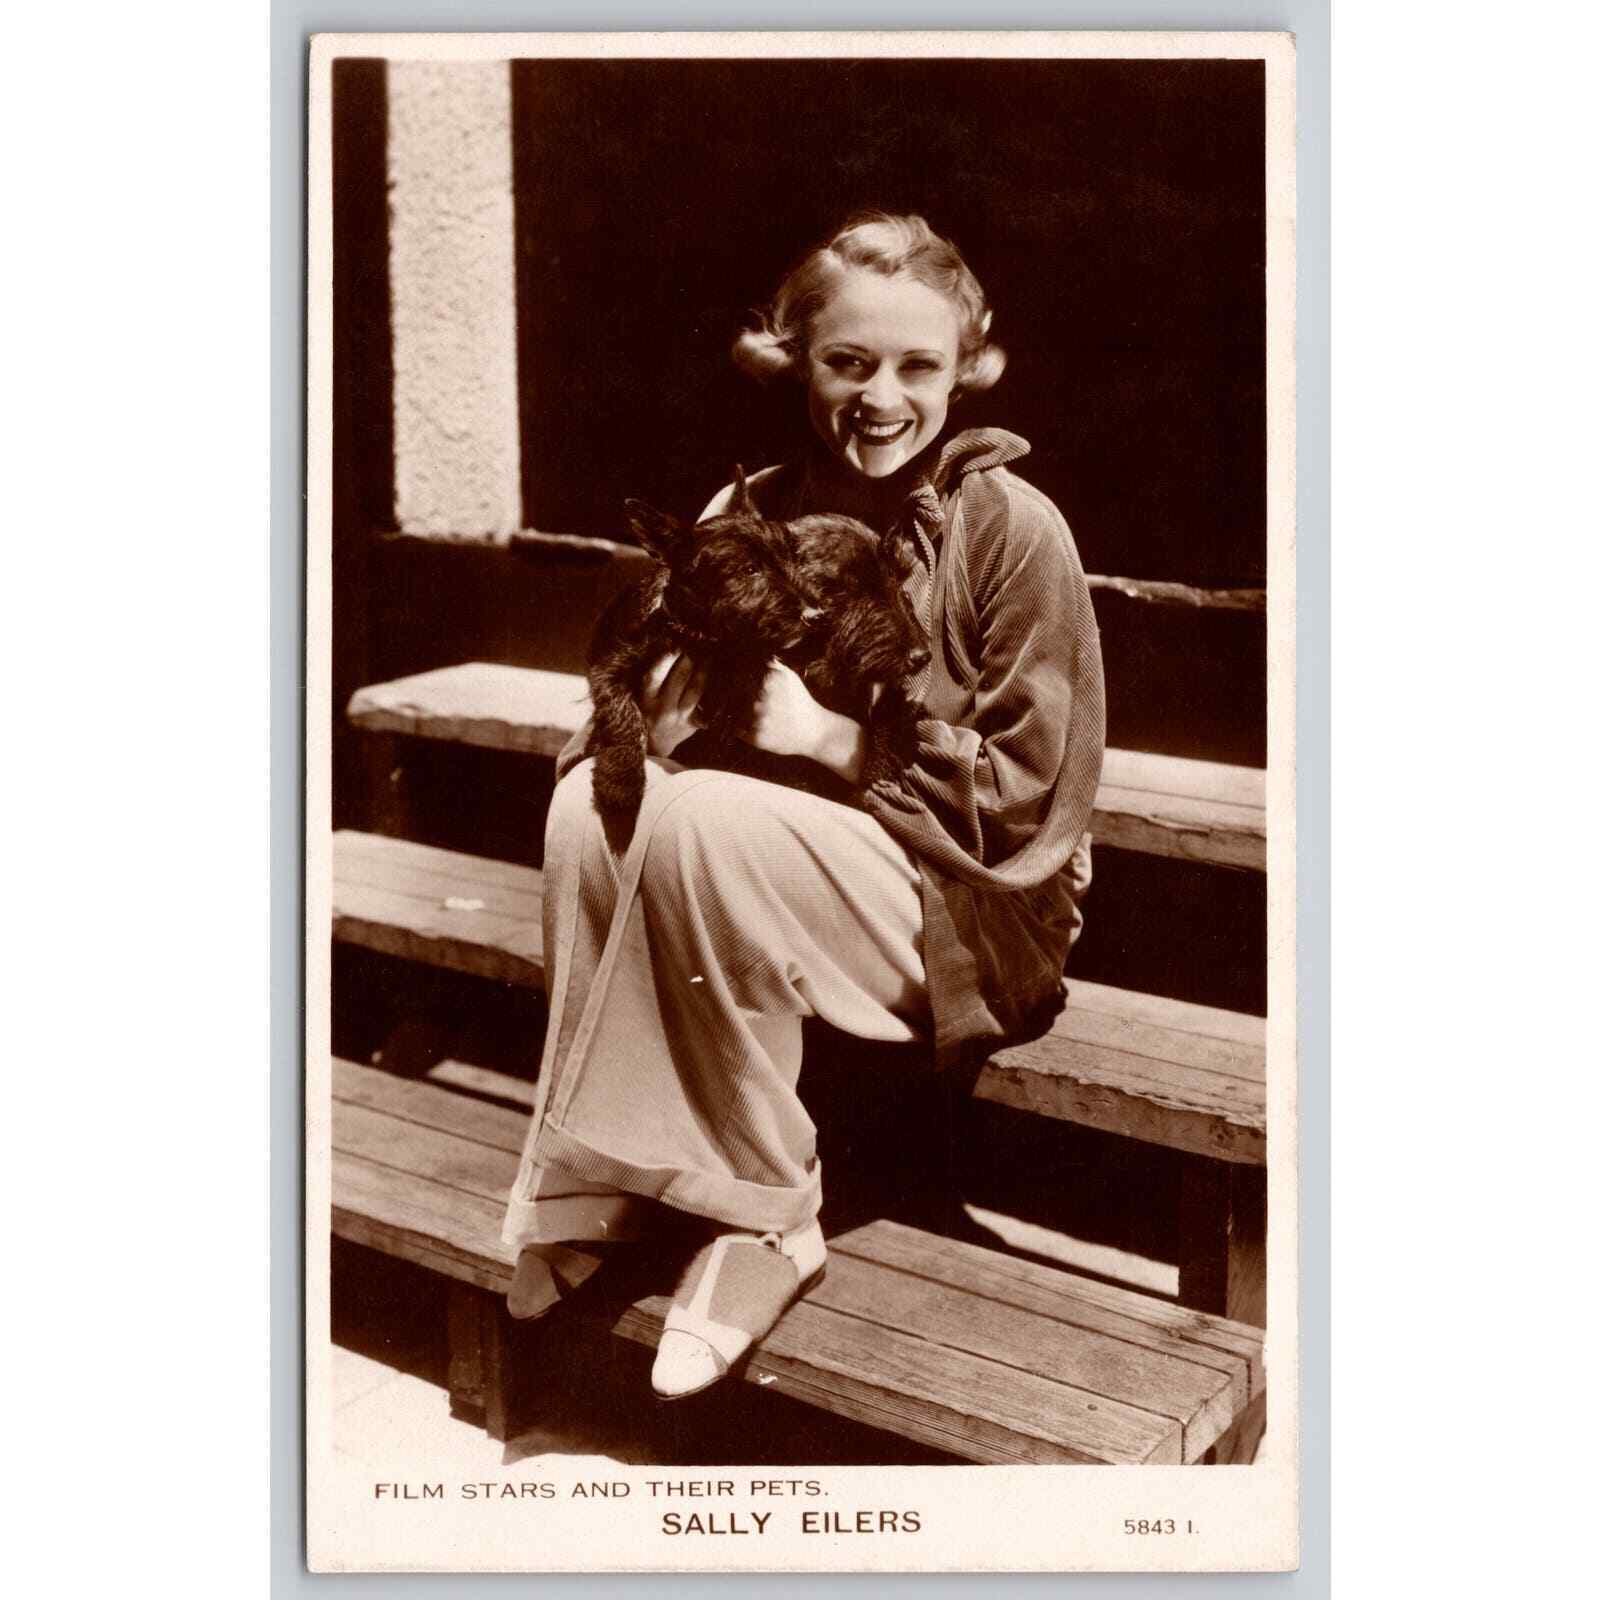 Postcard RPPC Sally Eilers Film Star And Their Pets Dog The Long Long Trail